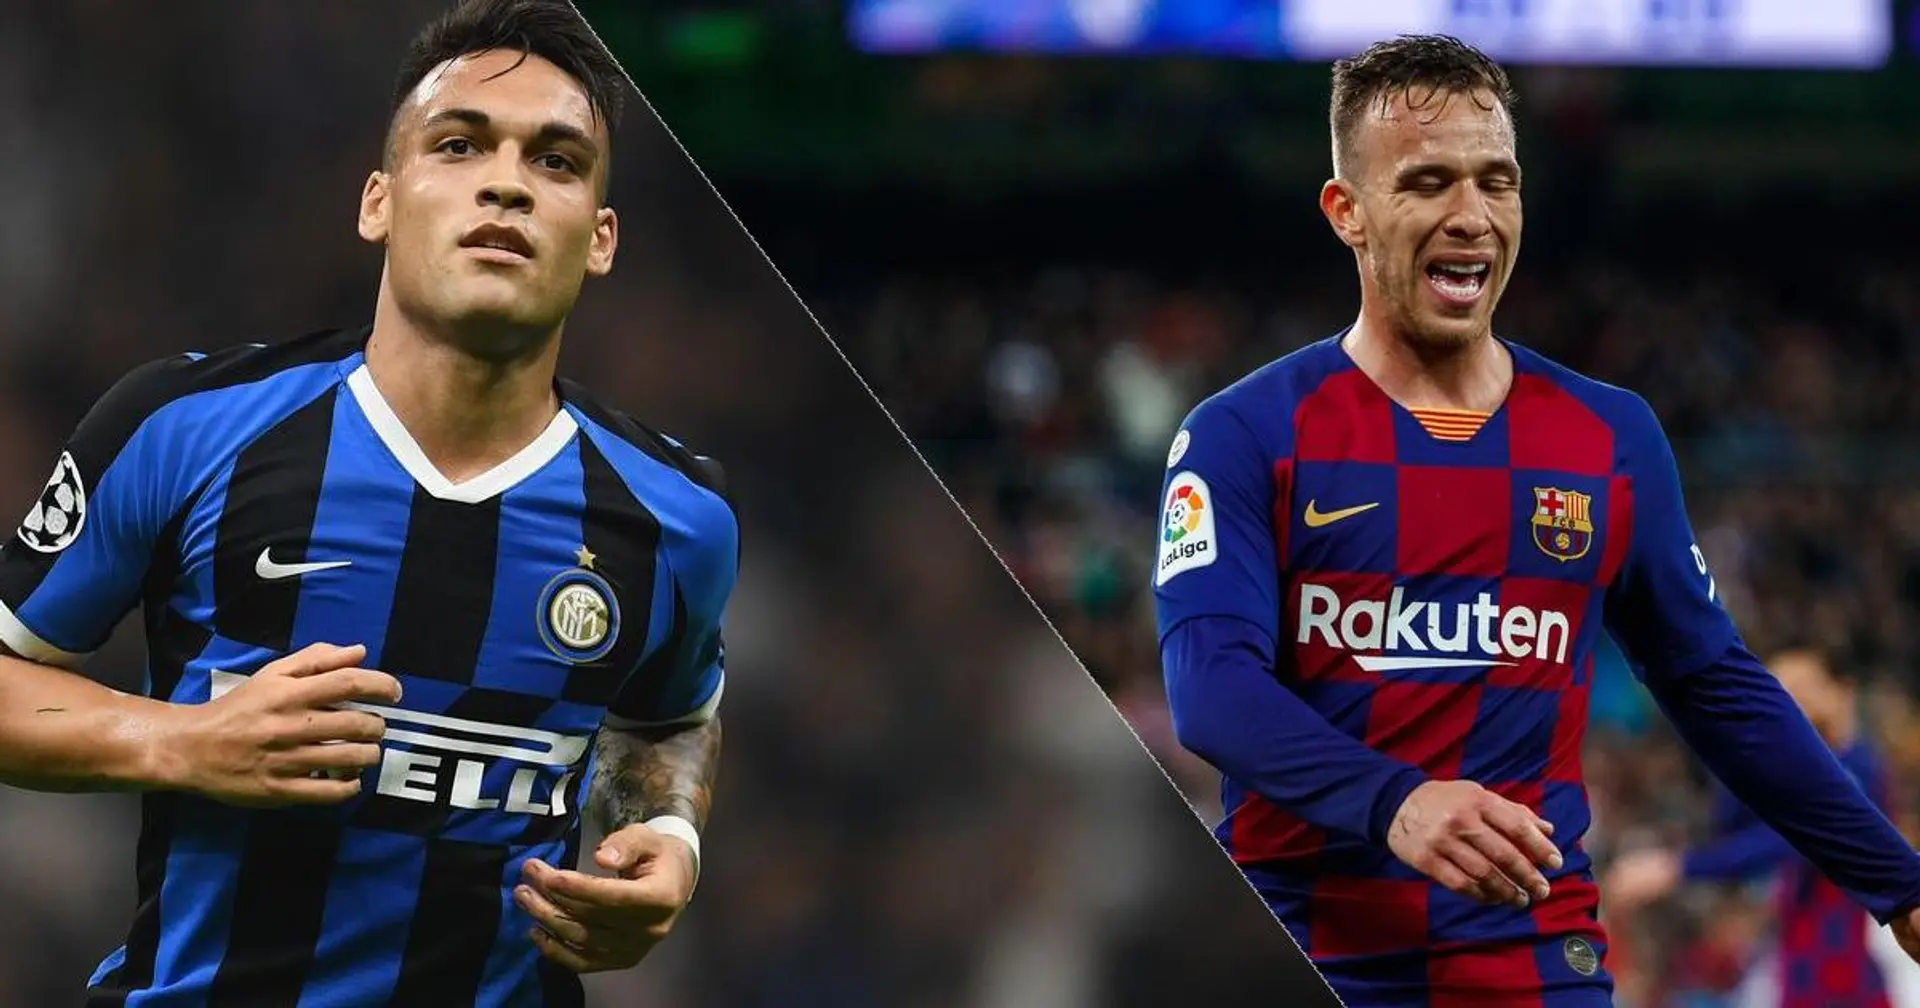 Inter said to want Arthur to be included in Lautaro deal